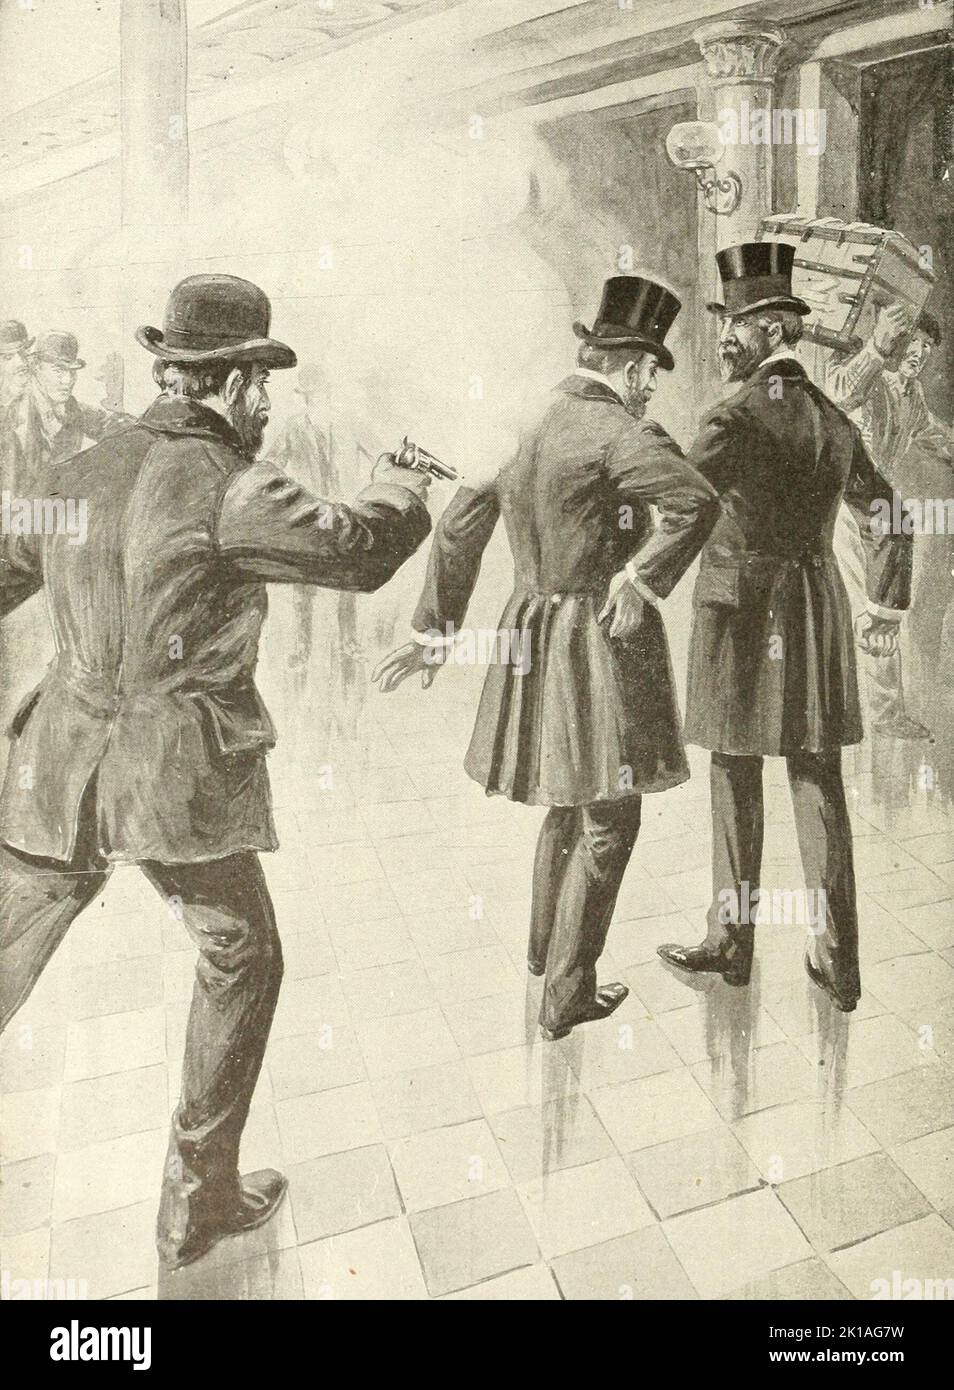 The assassination of president James Garfield by Charles Guiteau on July 2nd 1881. Garfield was not killed by the bullet but died, probably from sepsis, two months later on September 19th 1881. Stock Photo